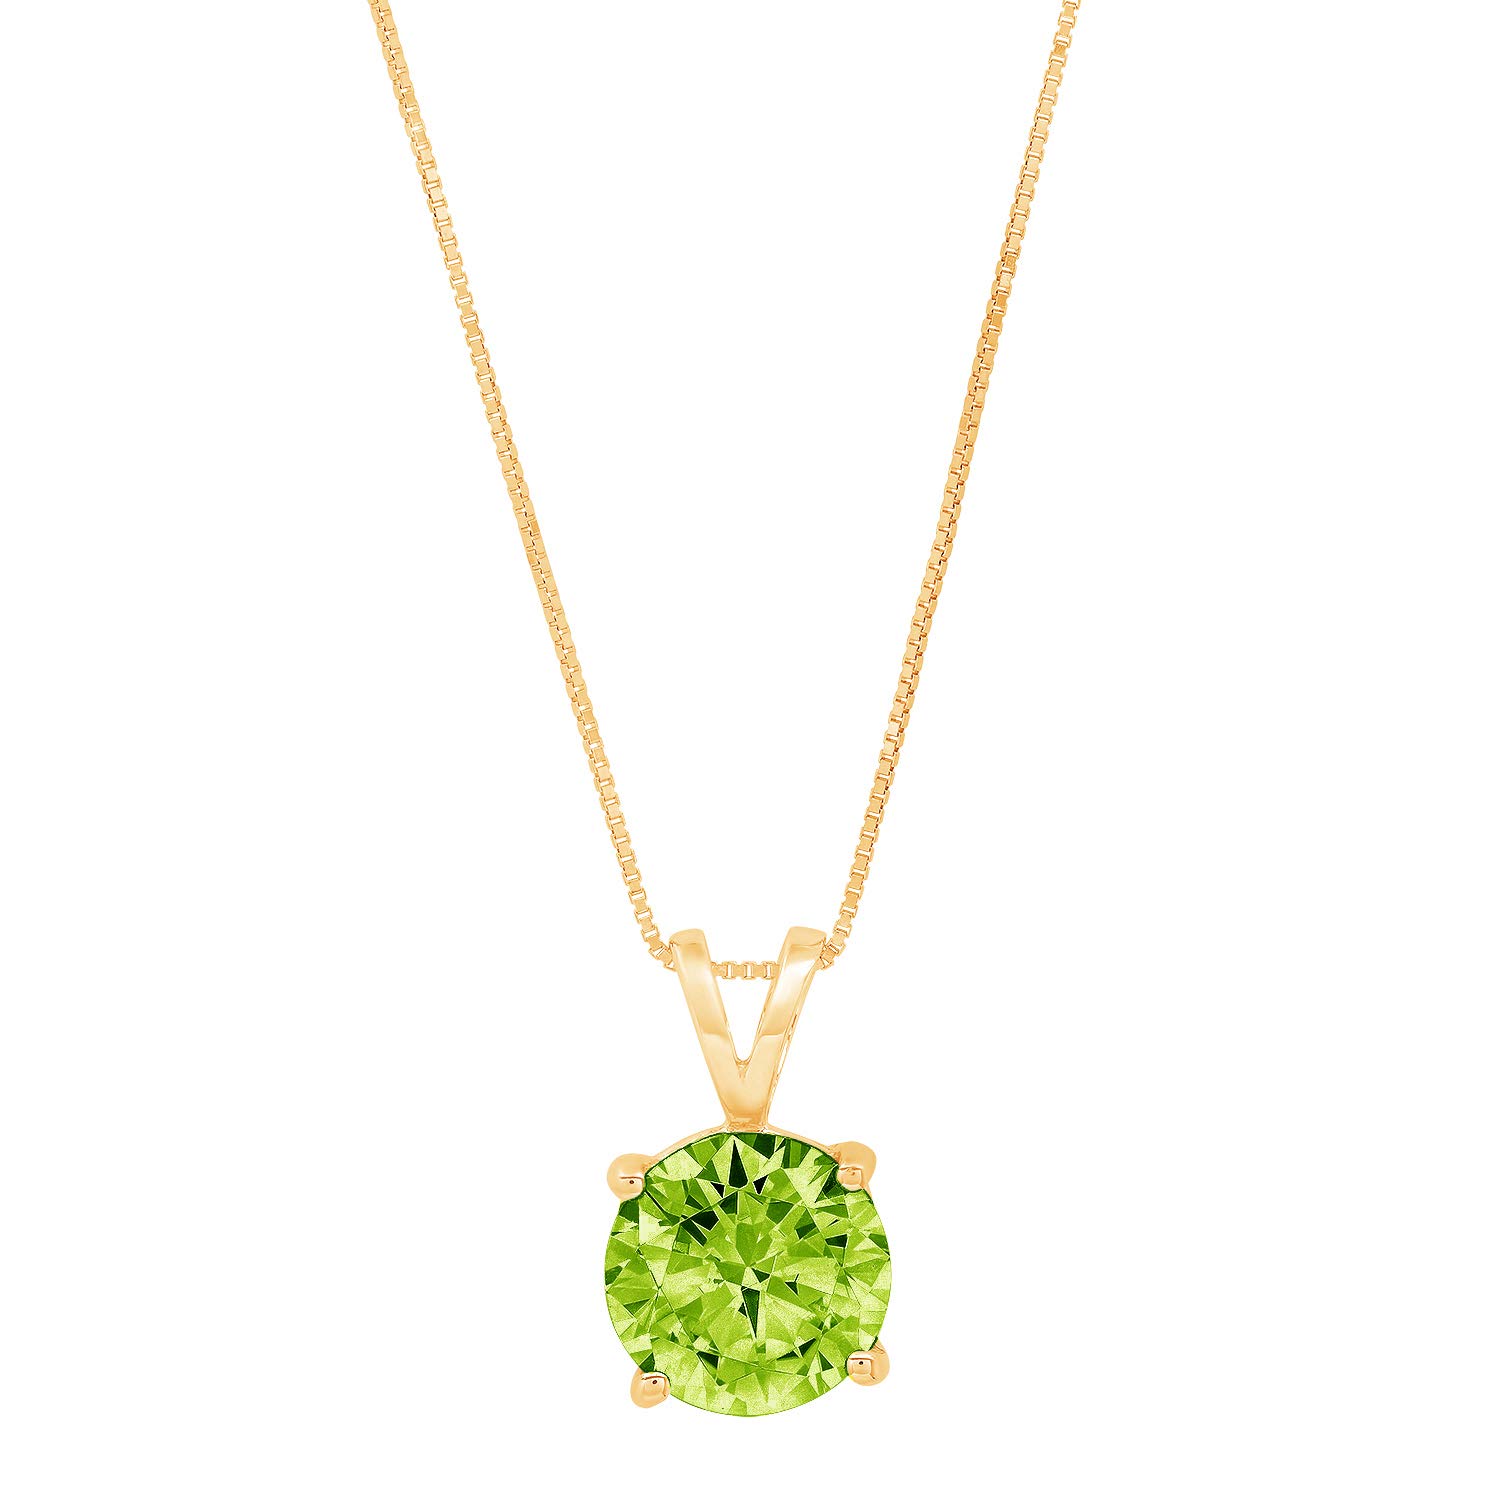 1.0 ct Brilliant Round Cut Designer Flawless Genuine Natural Green Peridot Gem Ideal VVS1 Solitaire Pendant Necklace With 16